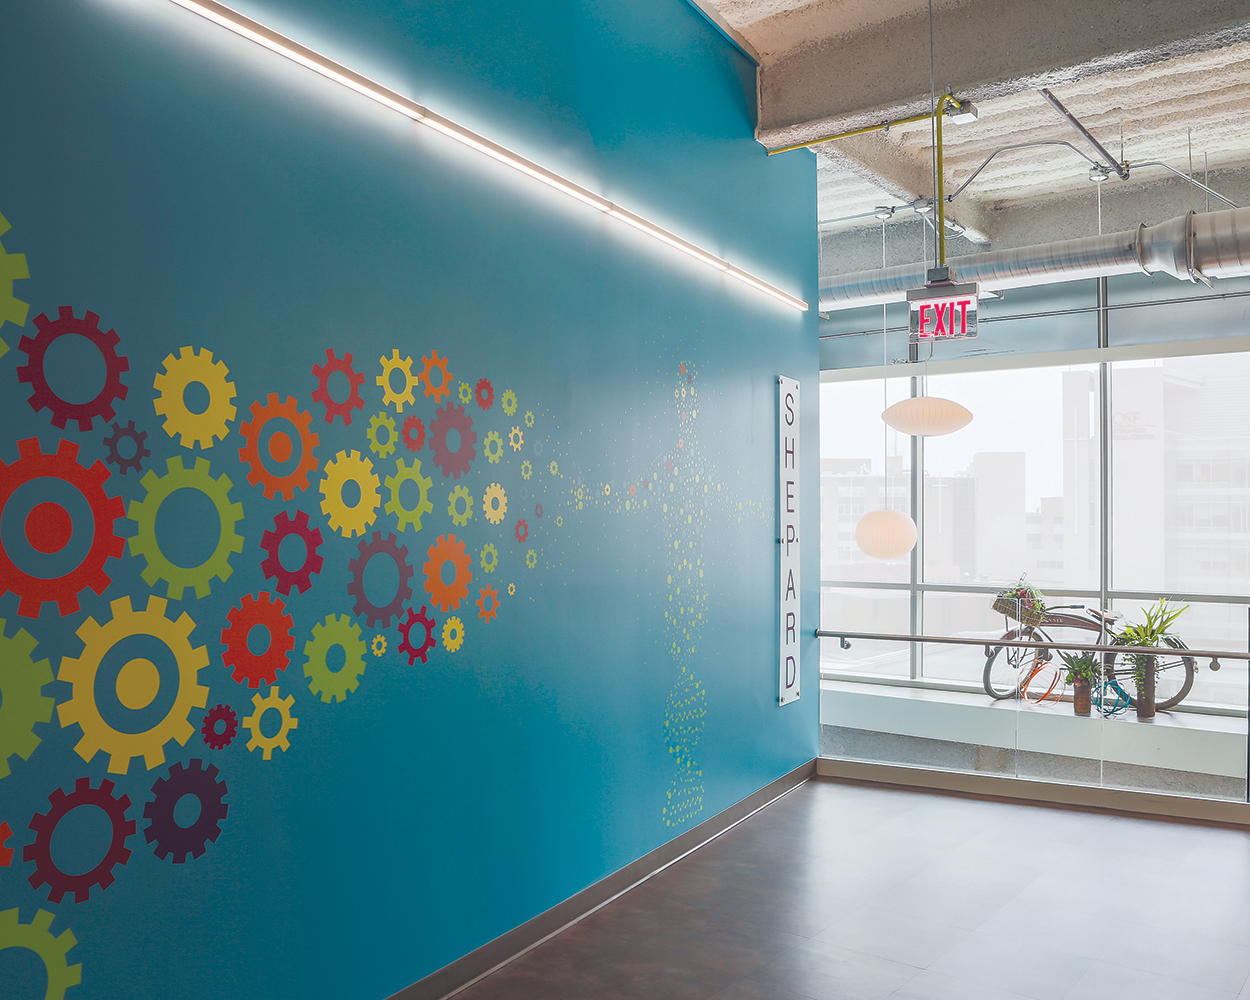 Sleight illuminates a blue wall with colorful gear icons for a modern office lighting design.